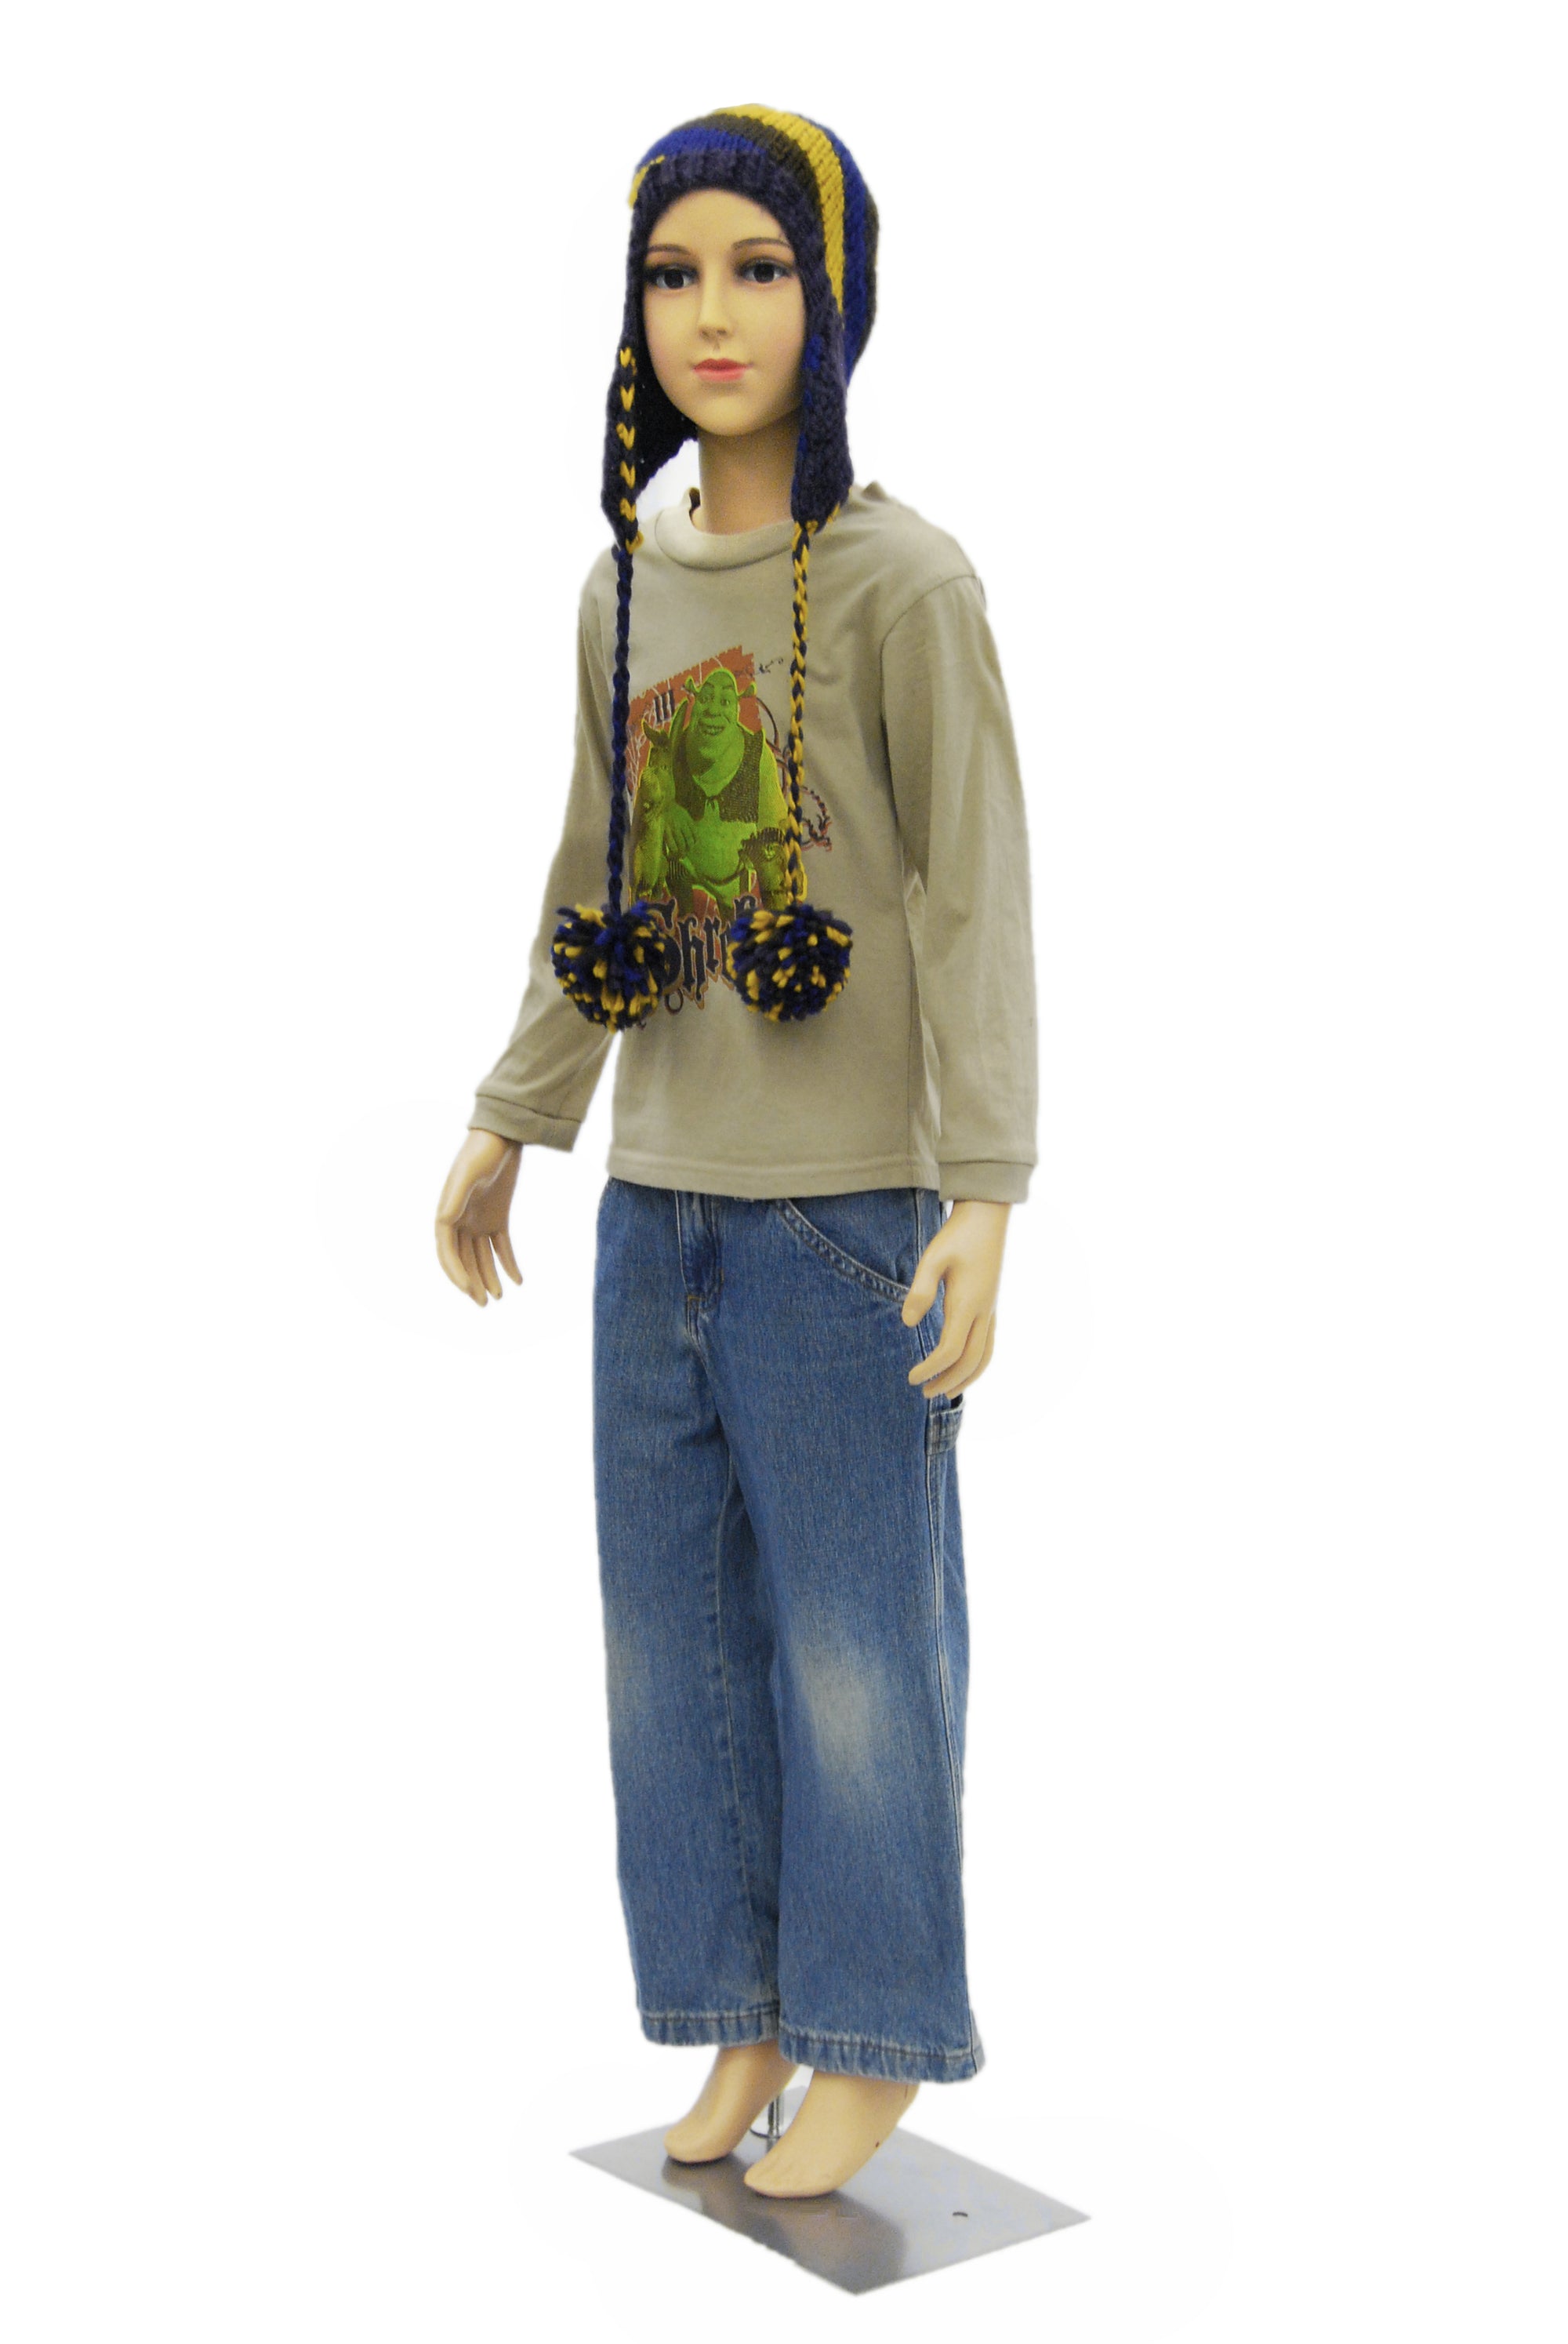 Old Child Mannequin - Size 8 Year Subastral